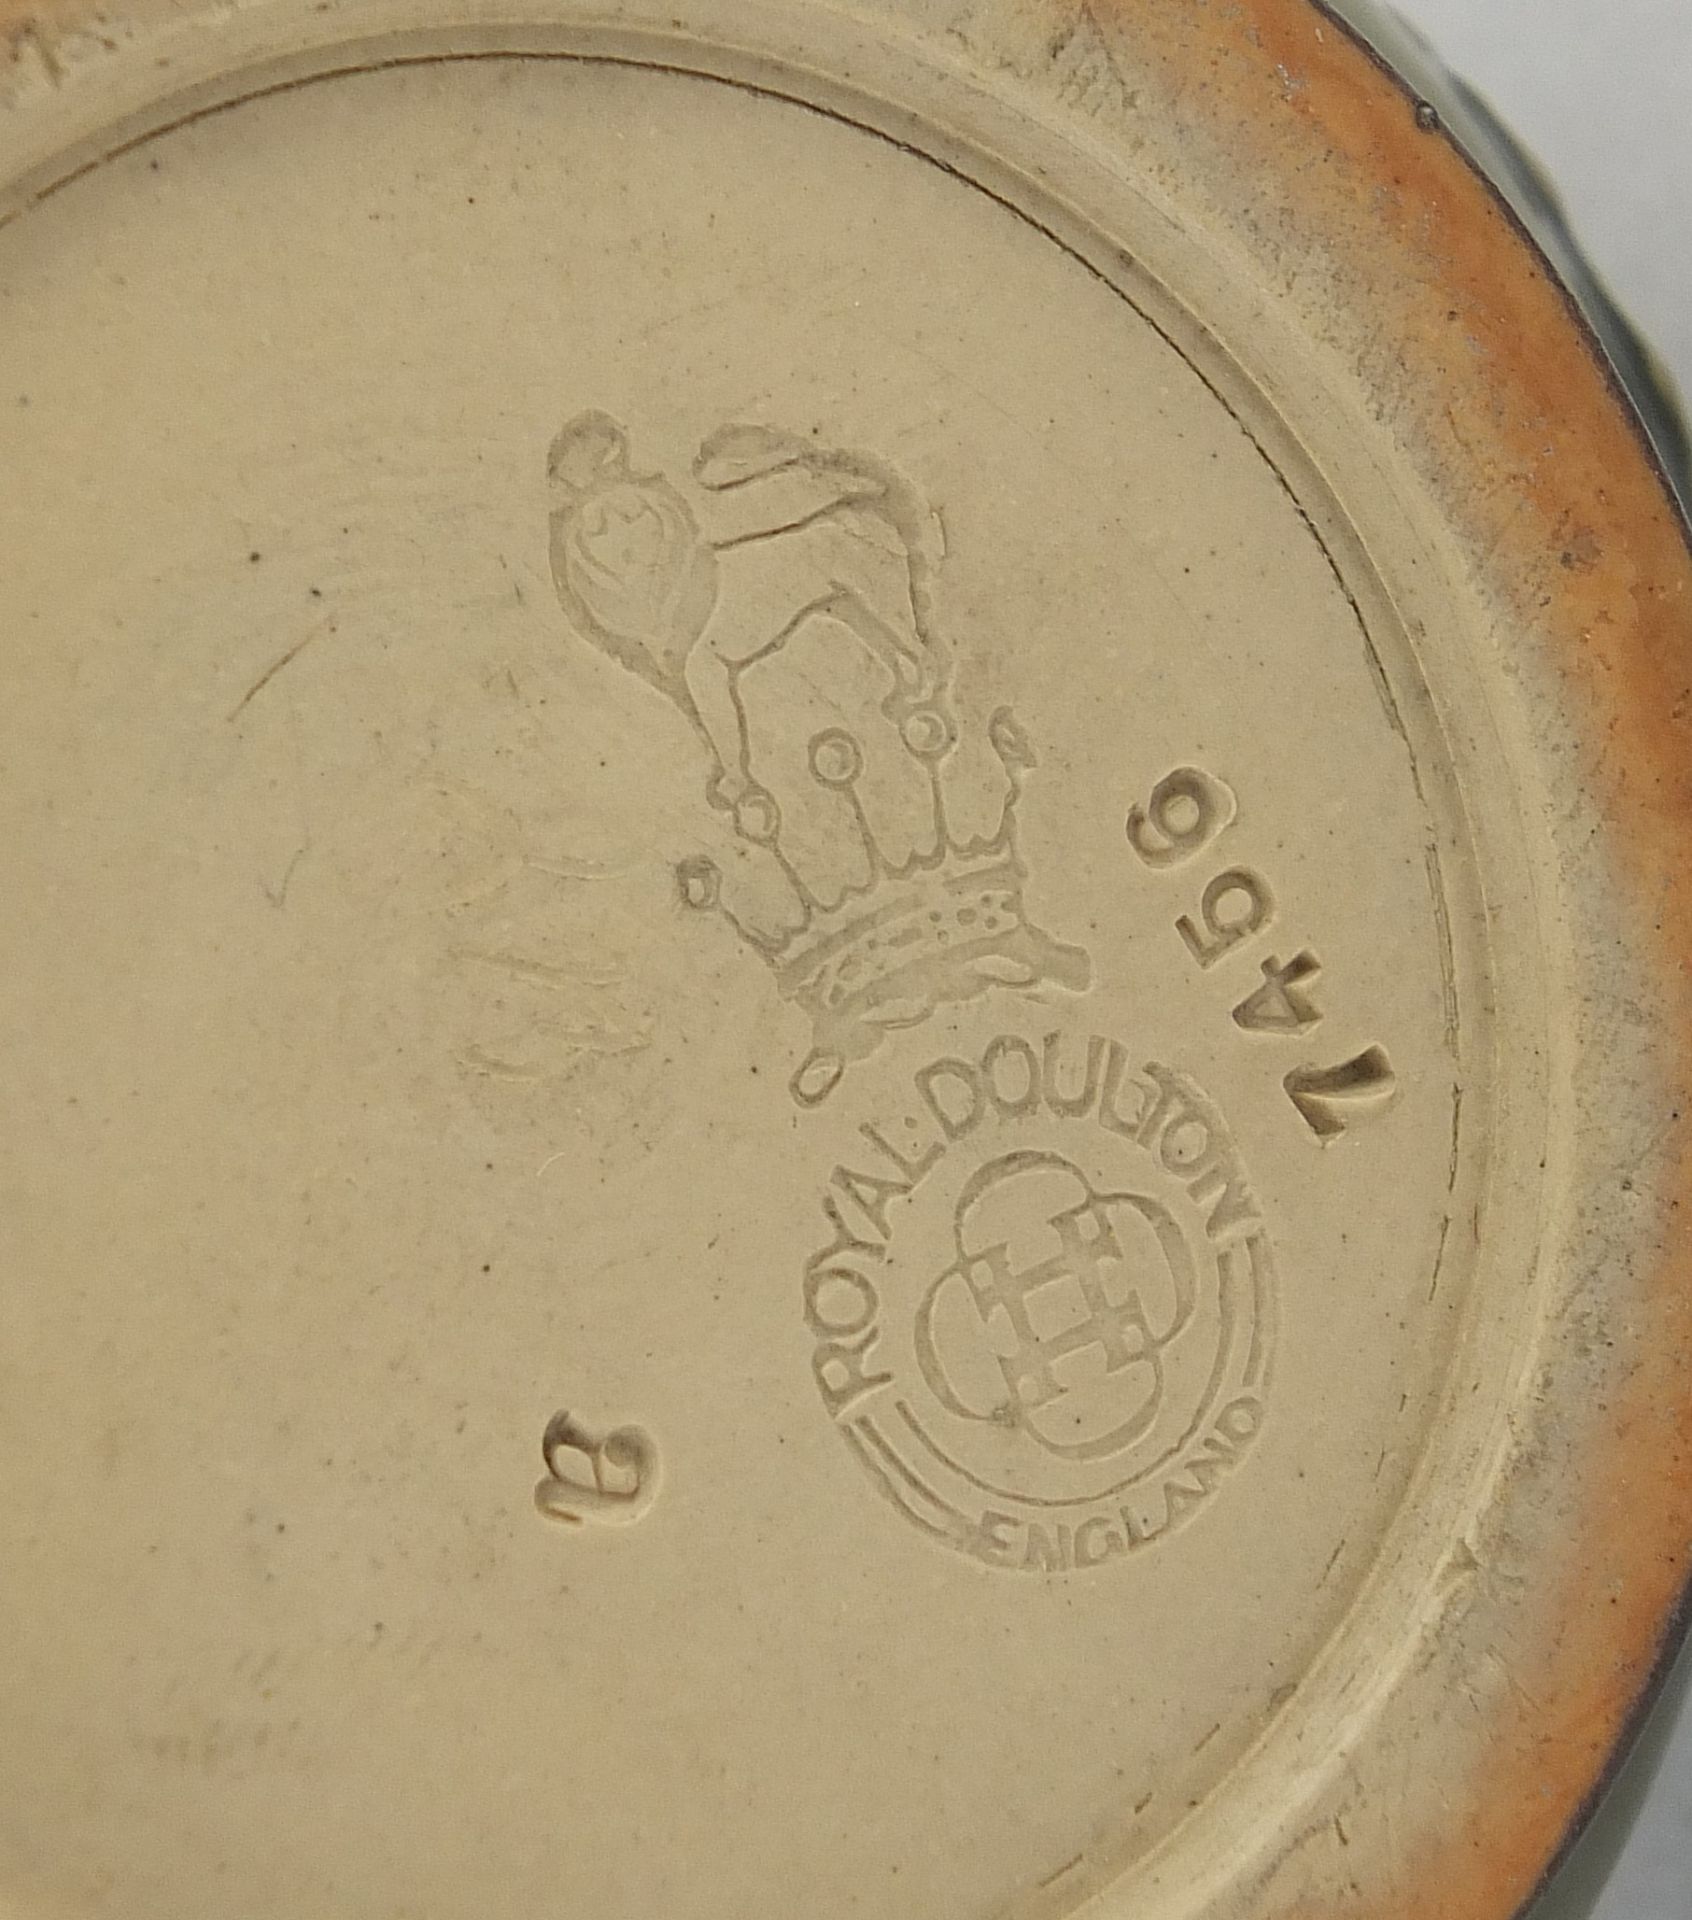 Royal Doulton stoneware mug commemorating the coronation of HM Queen Mary and HM King George V 1911, - Image 6 of 6